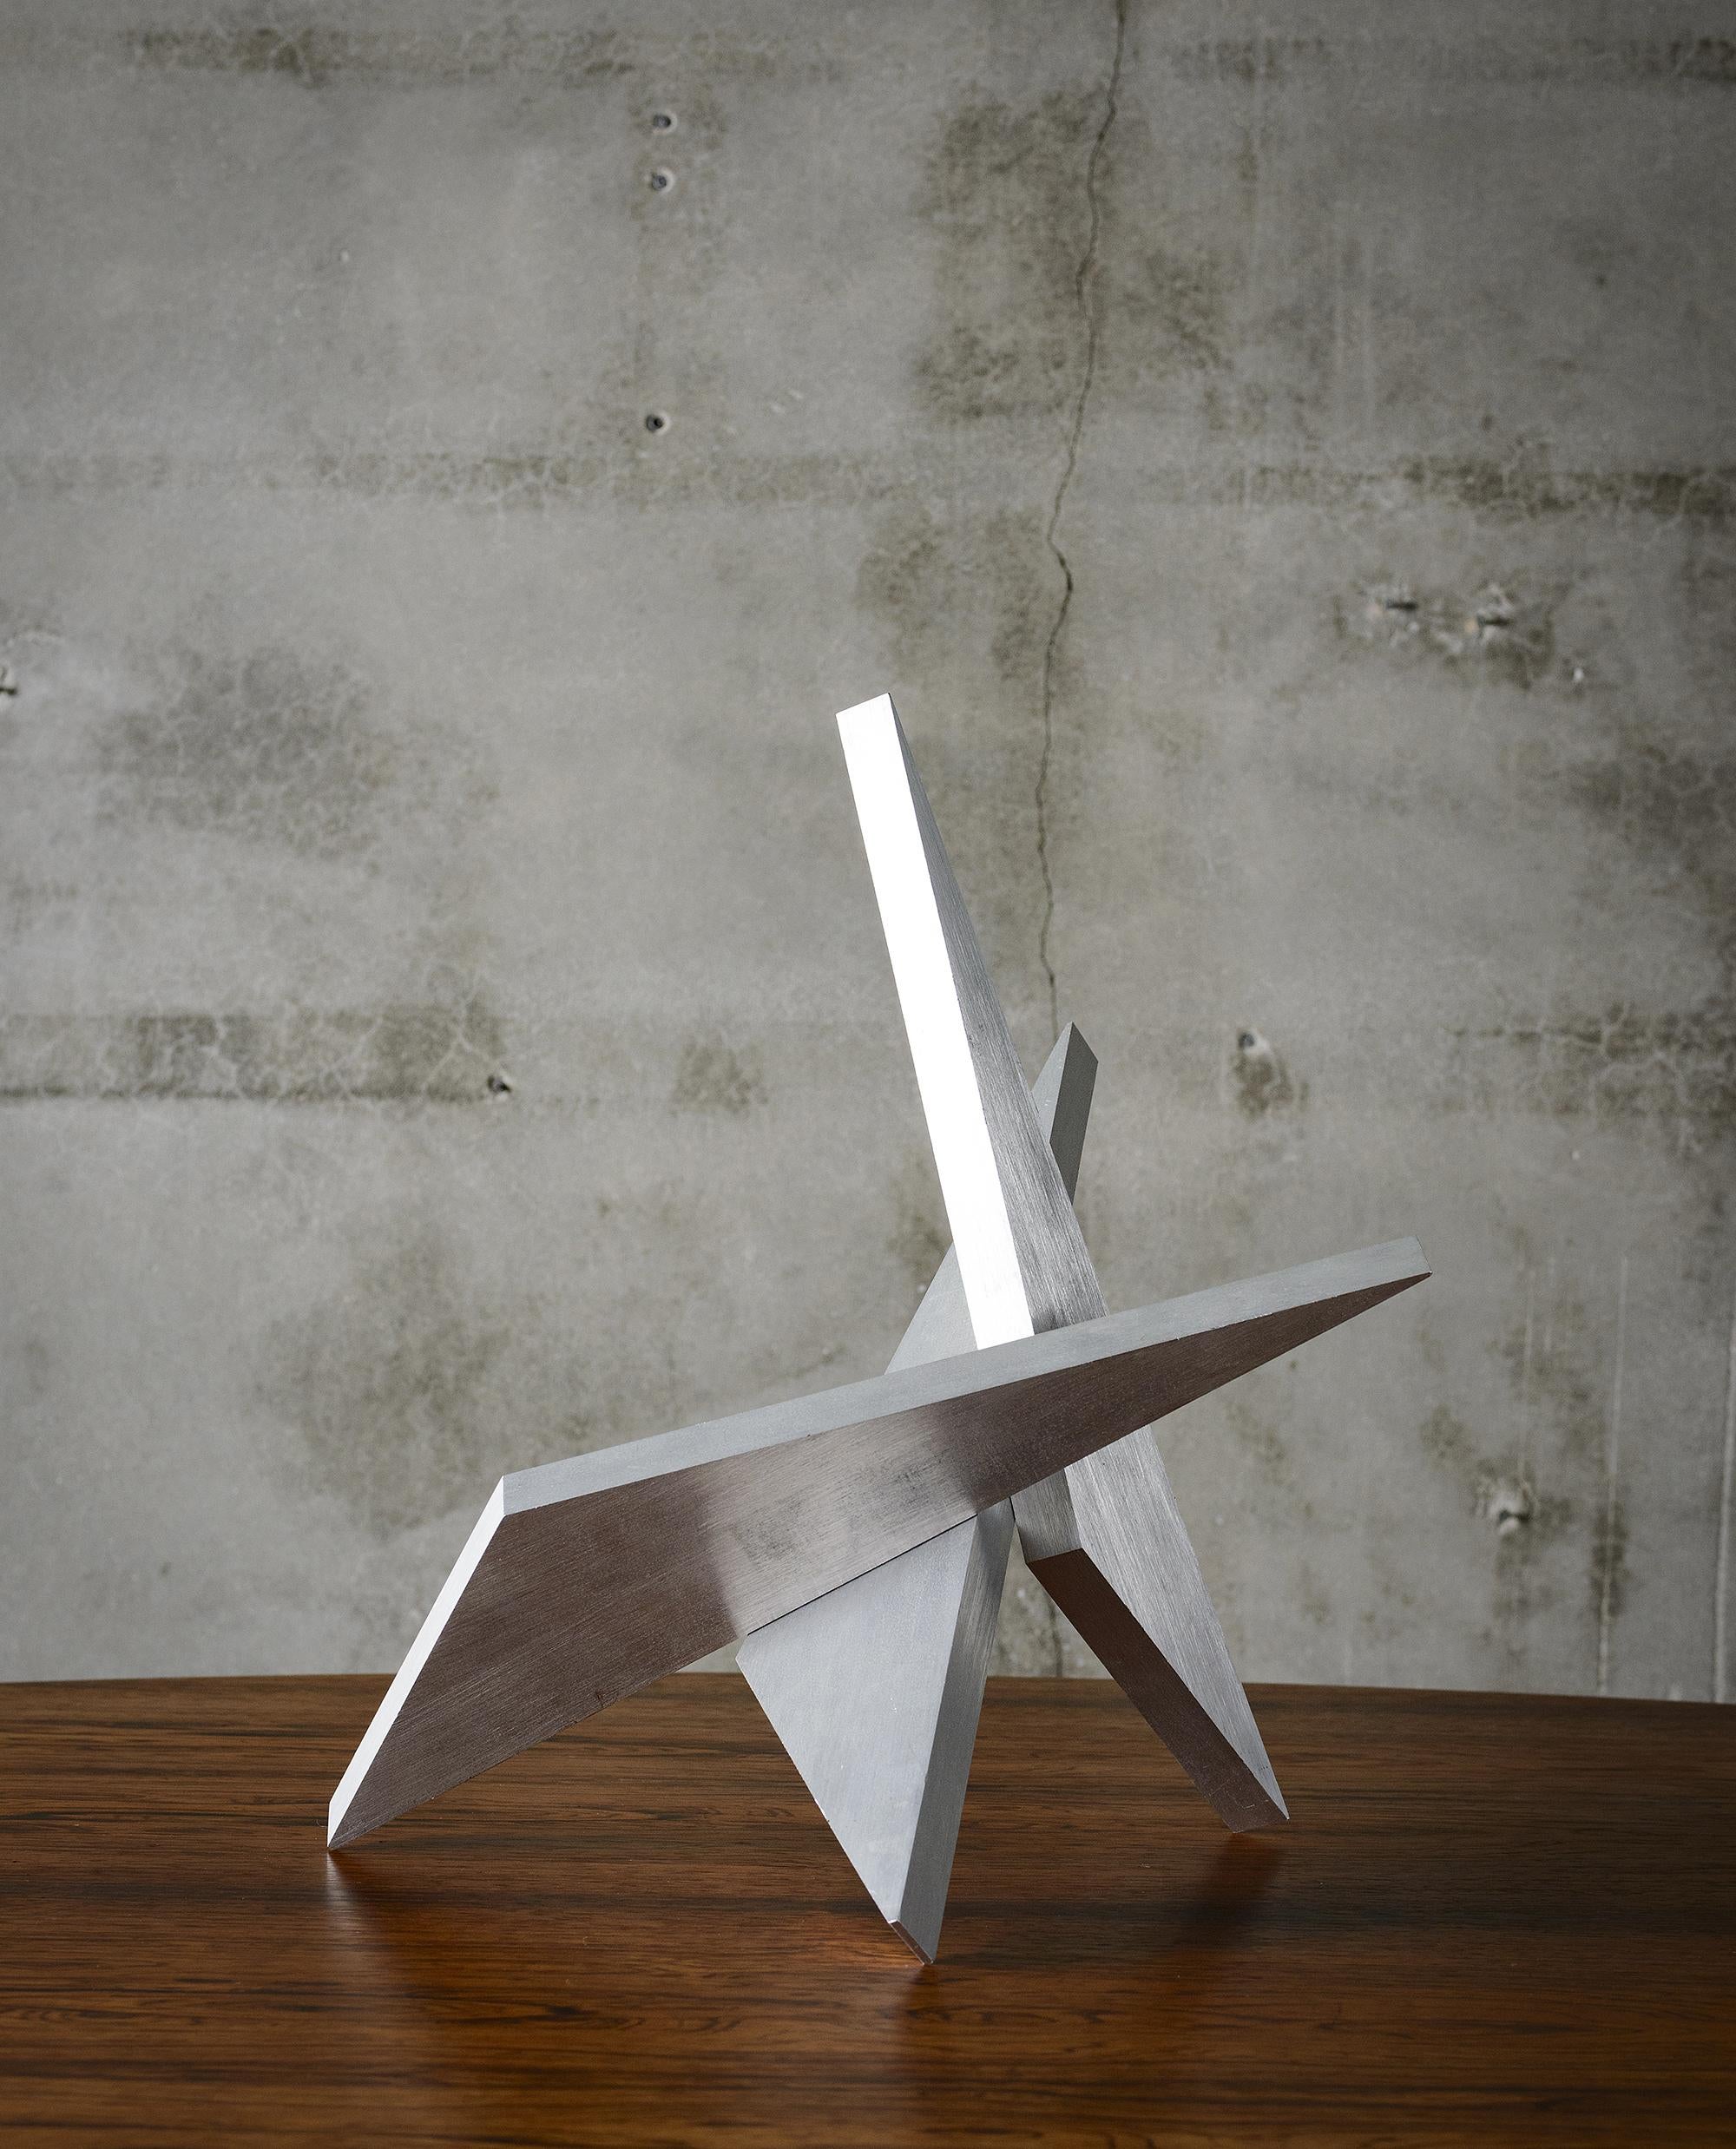 United States: Larry Mohr abstract aluminum sculpture; titled 